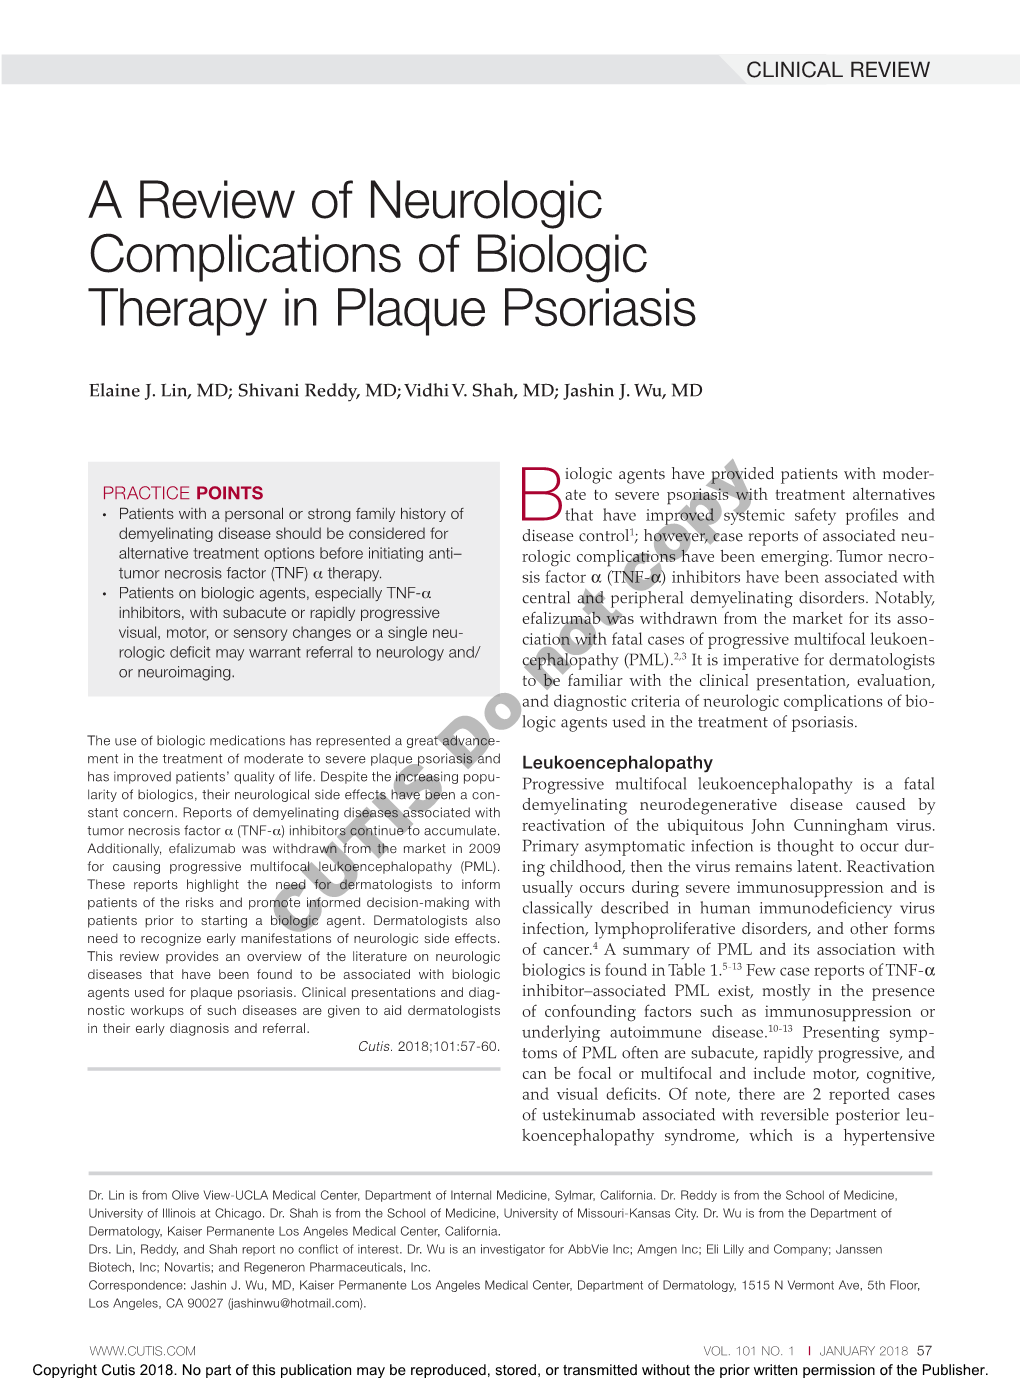 A Review of Neurologic Complications of Biologic Therapy in Plaque Psoriasis